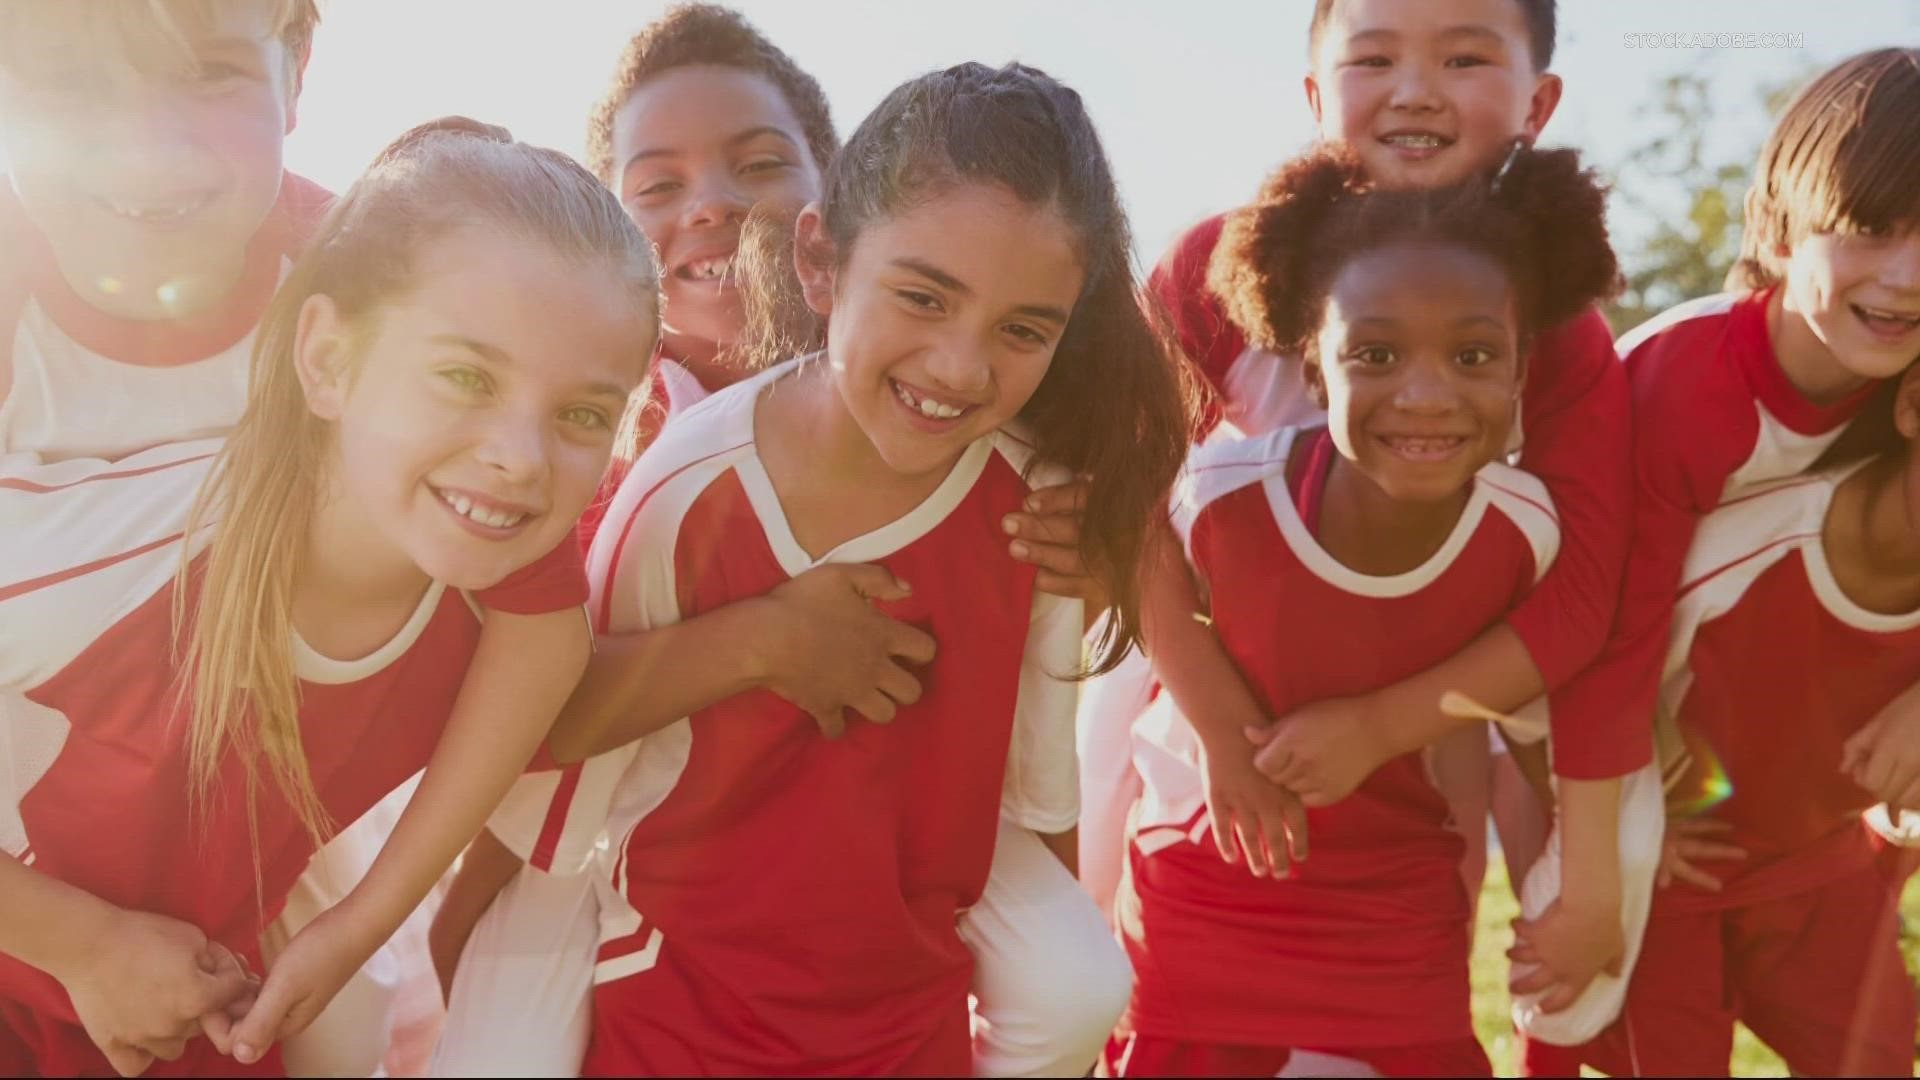 In this weeks Healthier Together we talked to a Doctor James Polo on how to prevent kids' sports-related injuries.